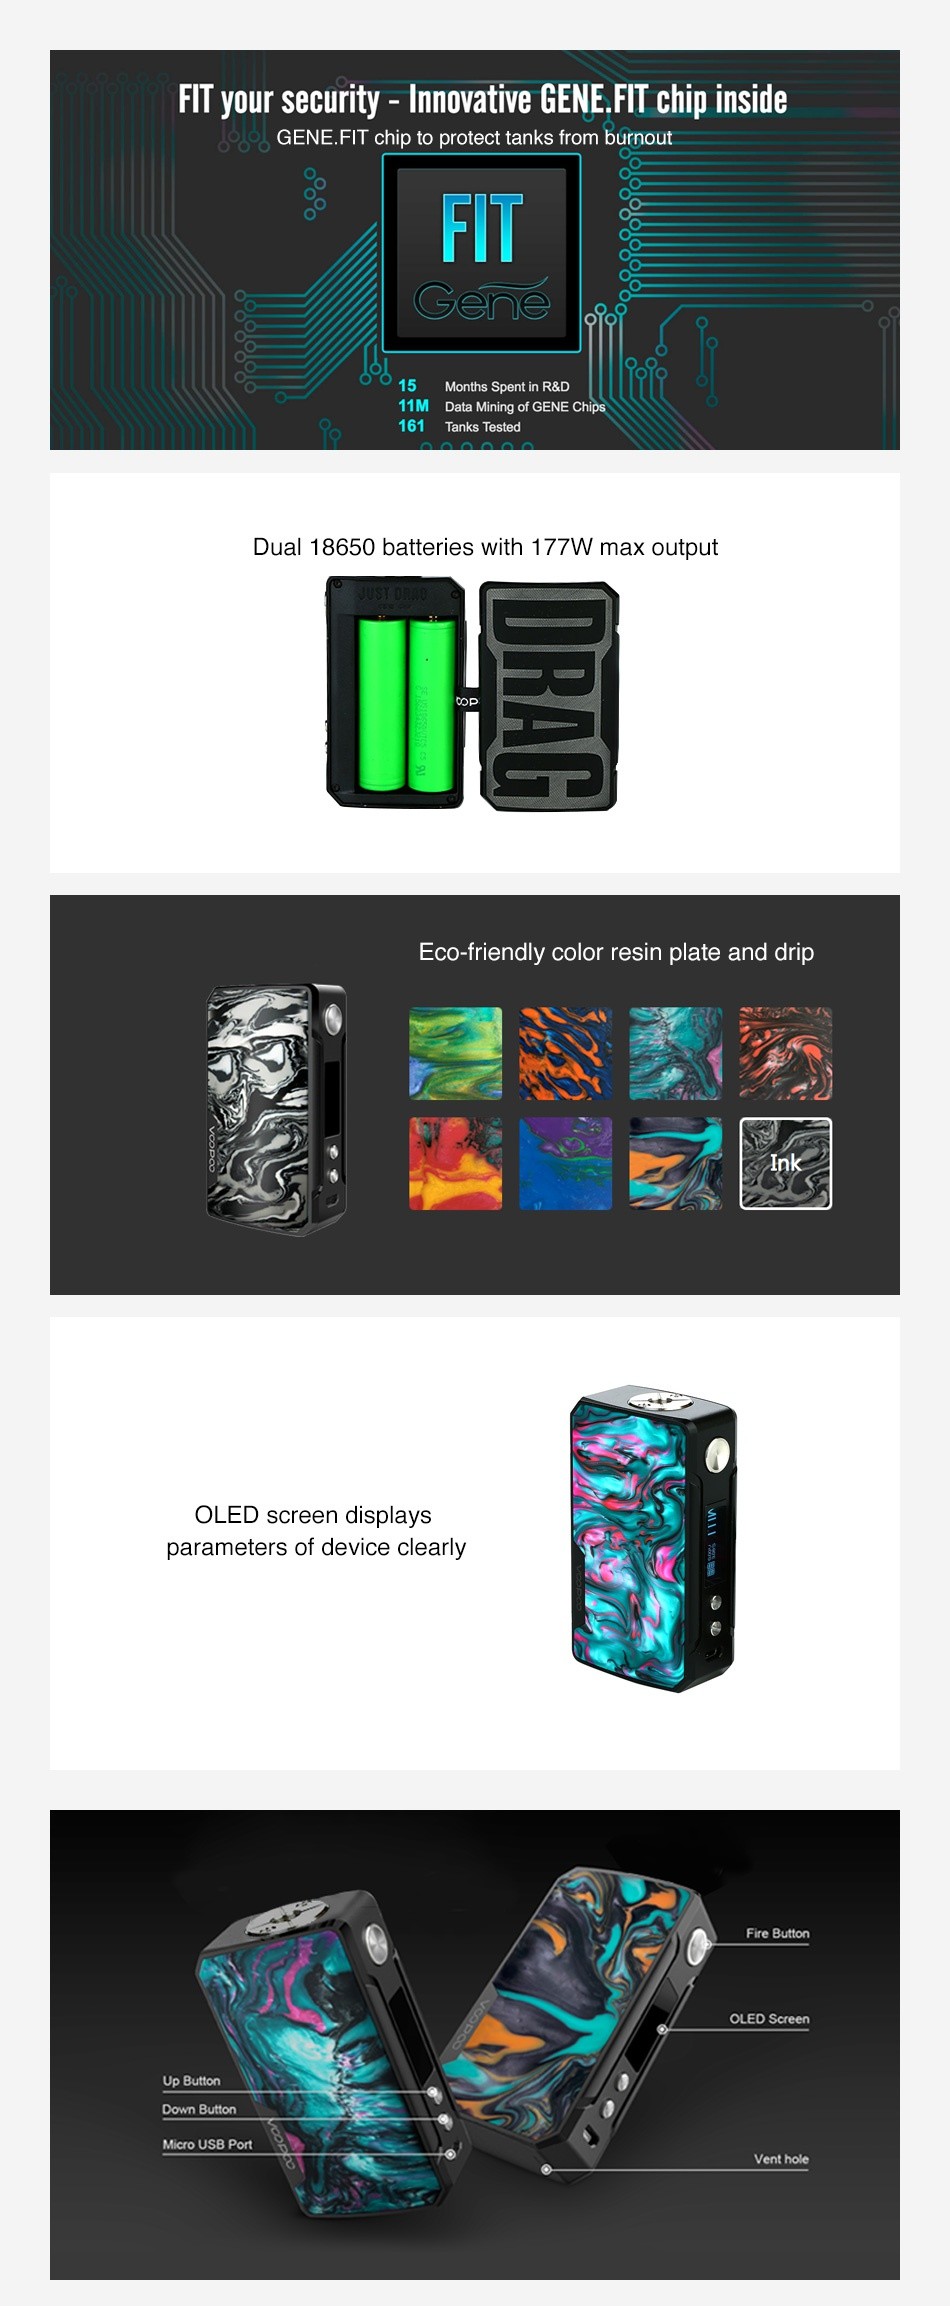 [Coming soon] VOOPOO Drag 2 177W TC Box MOD FIT your security  Innovative GENE FIT chip inside loo GENE FIT chip to protect tanks from burnout FIT 15 Months Spent in R D ata Mining of GENE Chips 161 Tanks Tested Dual 18650 batteries with 177W max output Eco friendly color resin plate and drip OLED screen displays parameters of device clearly Fire Button OLED Screen Vent hole